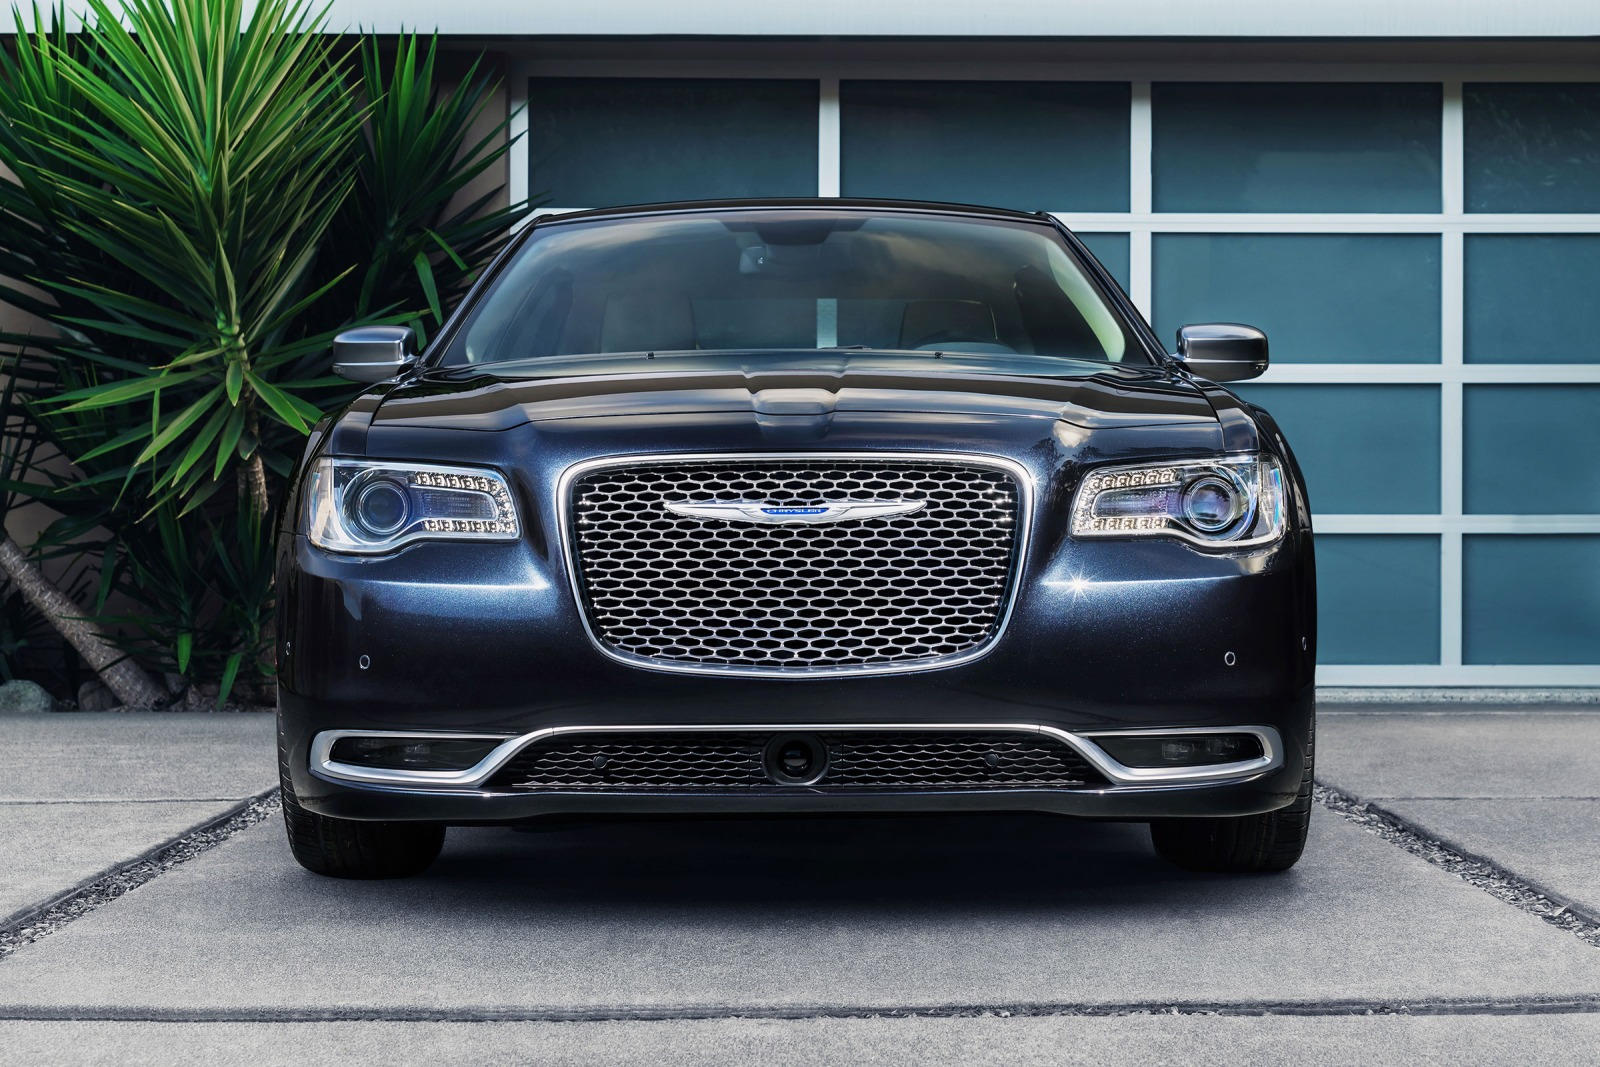 2019 Chrysler 300 Front View